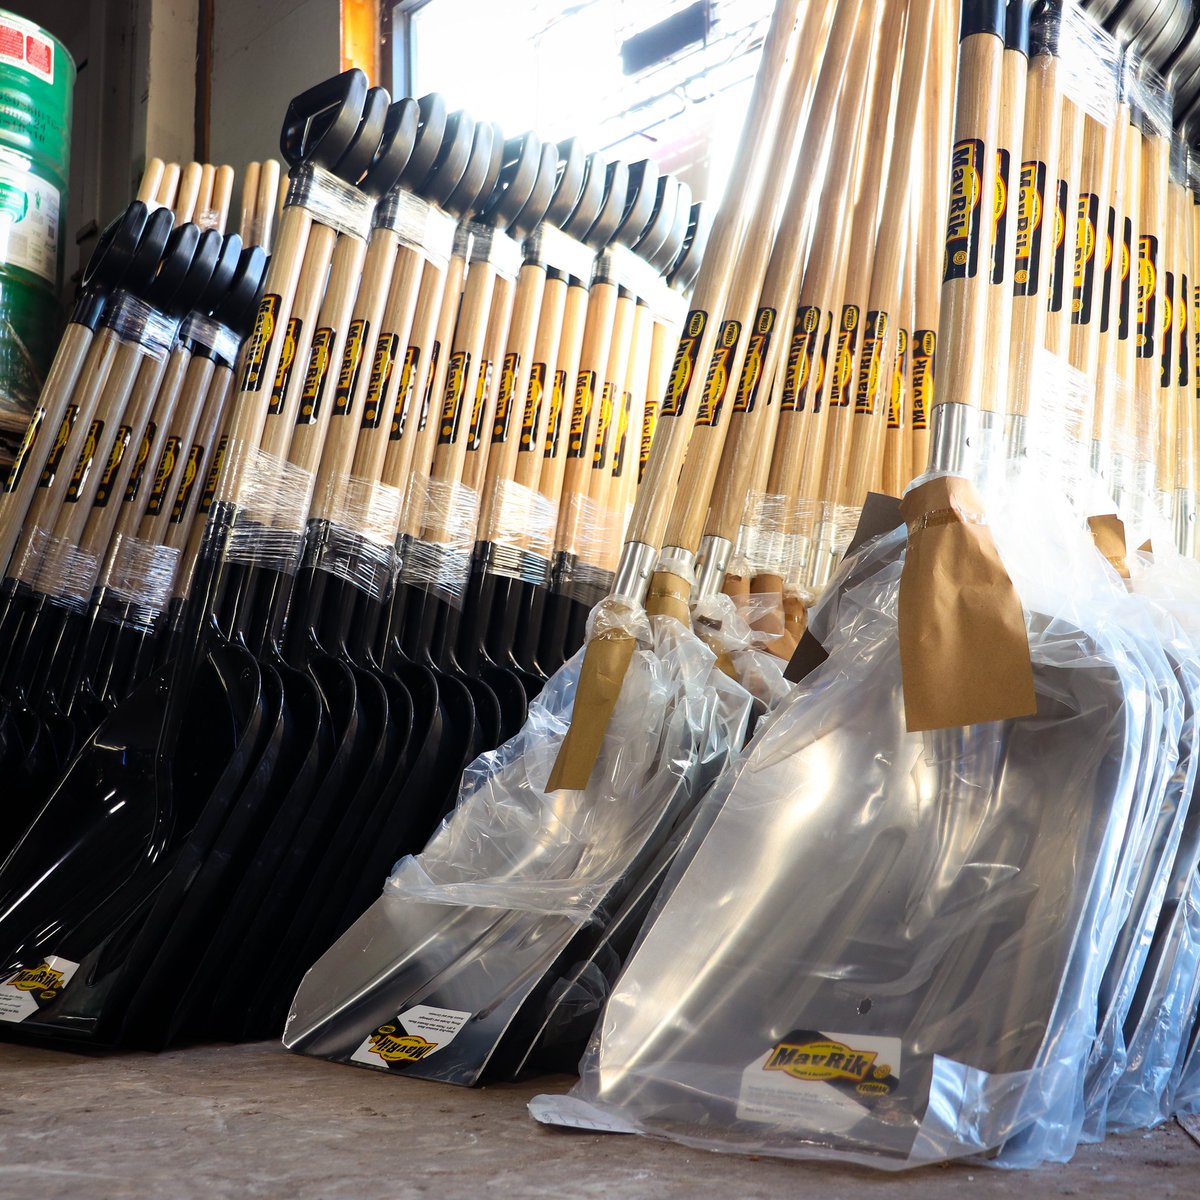 Due to extremely high demand, we've restocked our supply of shovels! With both long and D-handle grips, we have TONS of shovels in poly, steel, and aluminum. Also check with us on roof rakes and snow scoops - availability changes daily!
#yohoshovels #amestools #906rentals